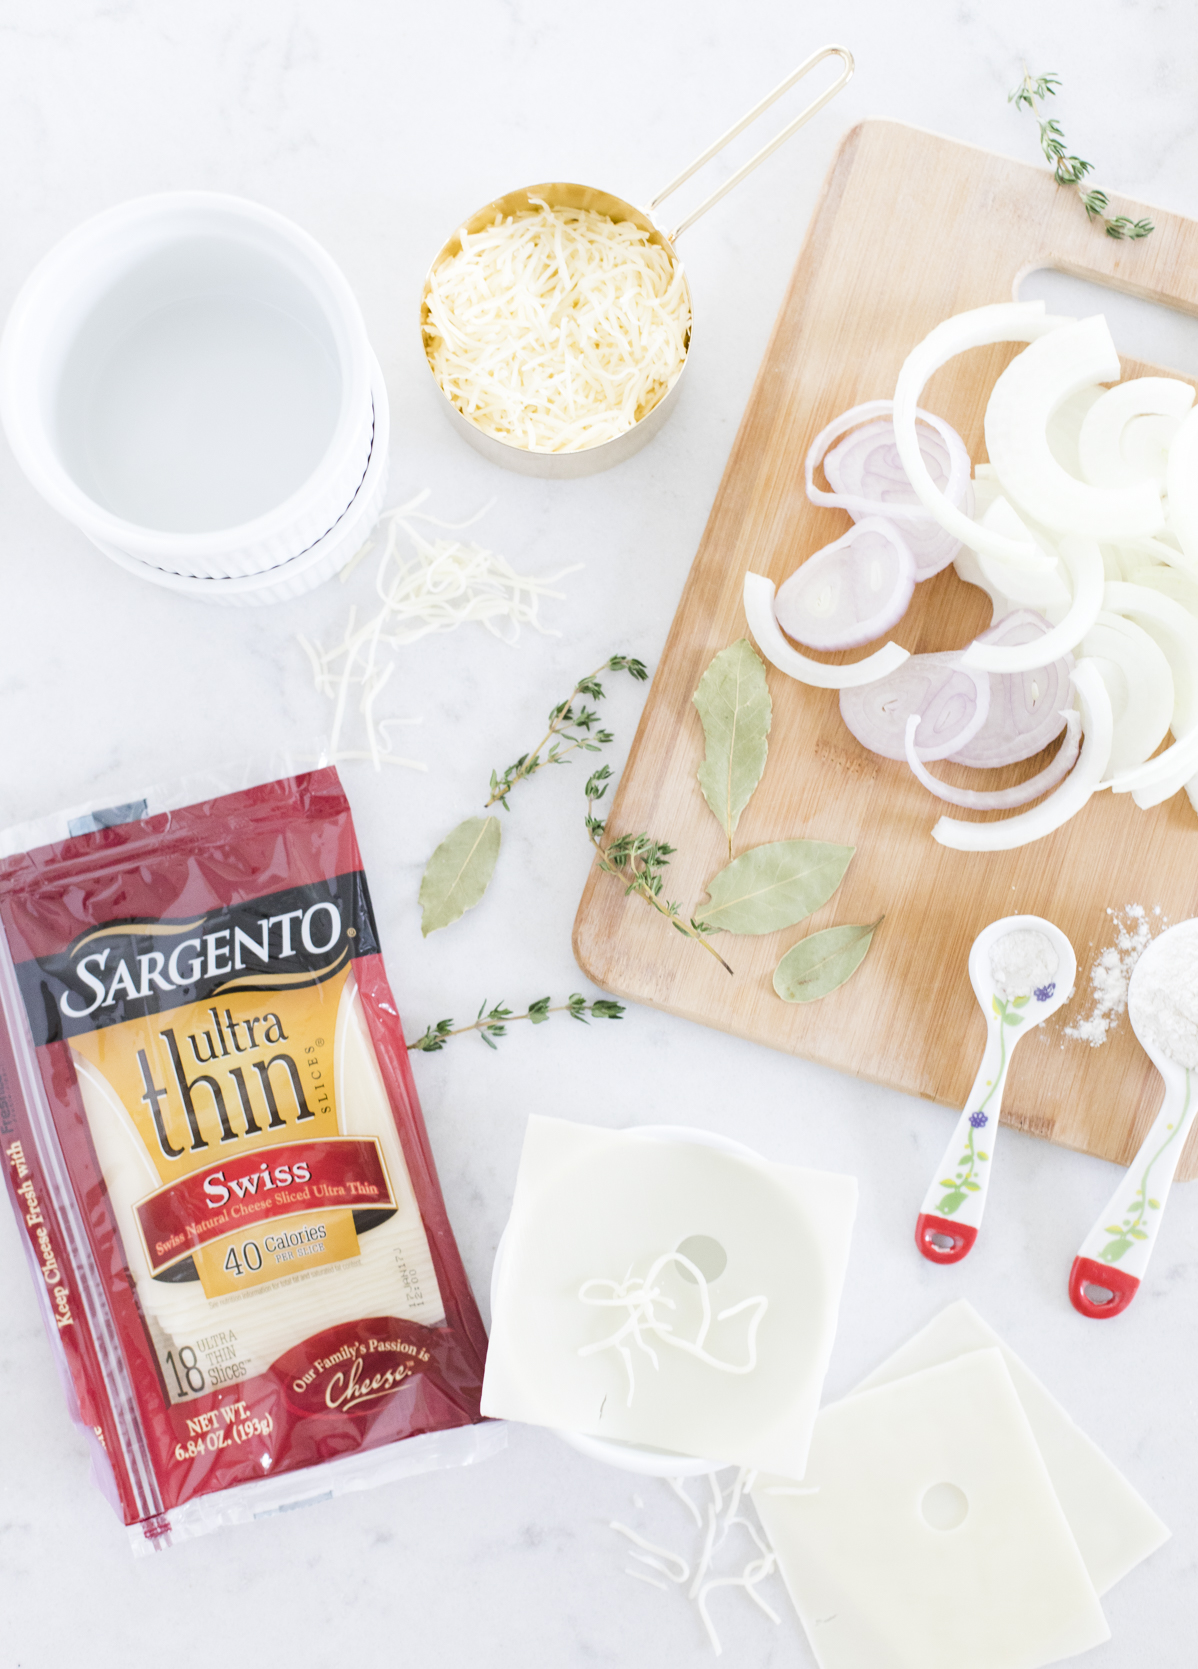 What is a good recipe that includes Sargento cheese?